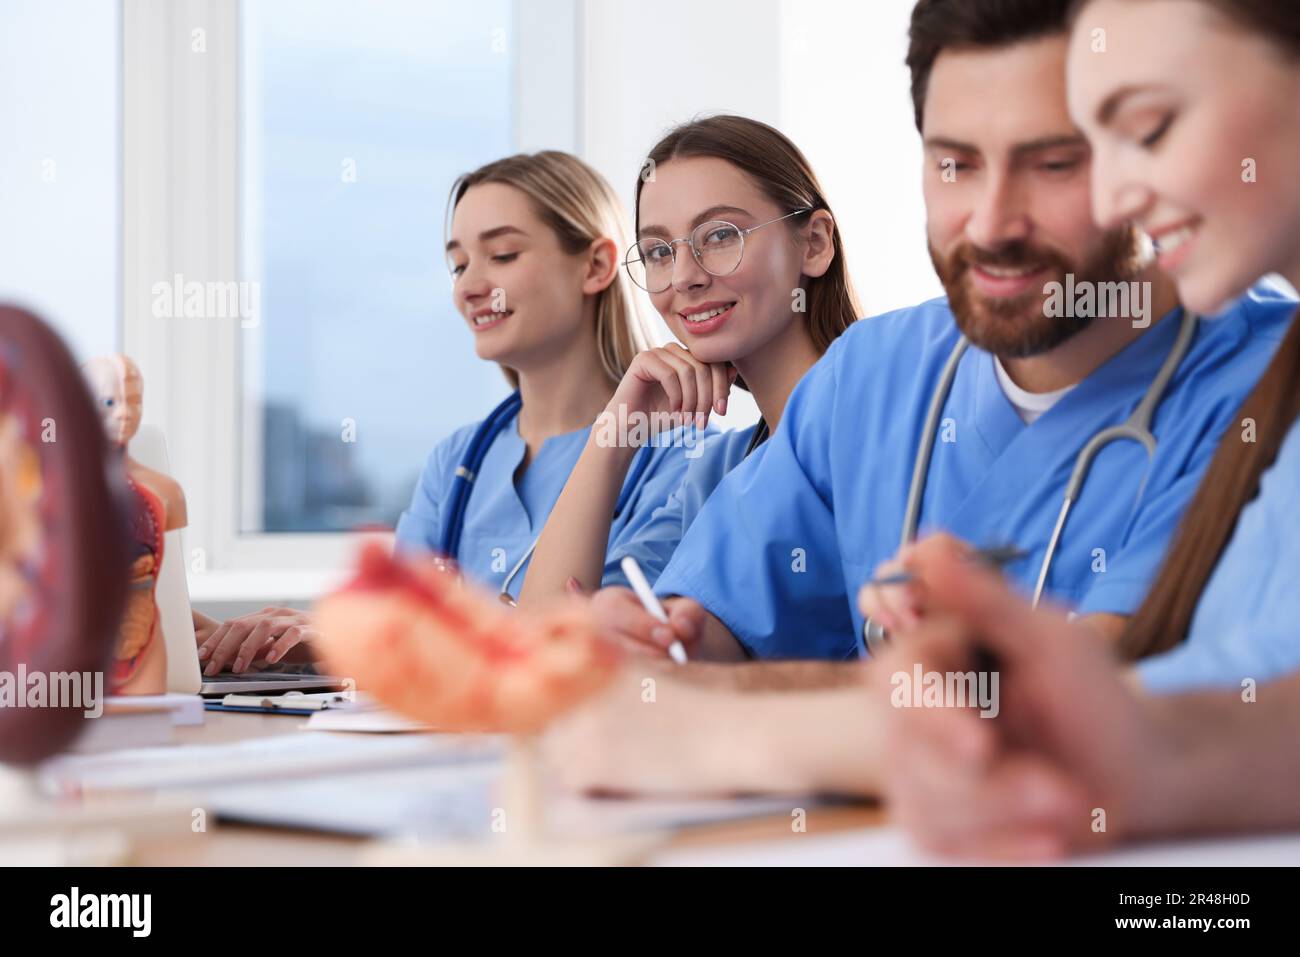 Medical students in uniforms studying at university Stock Photo